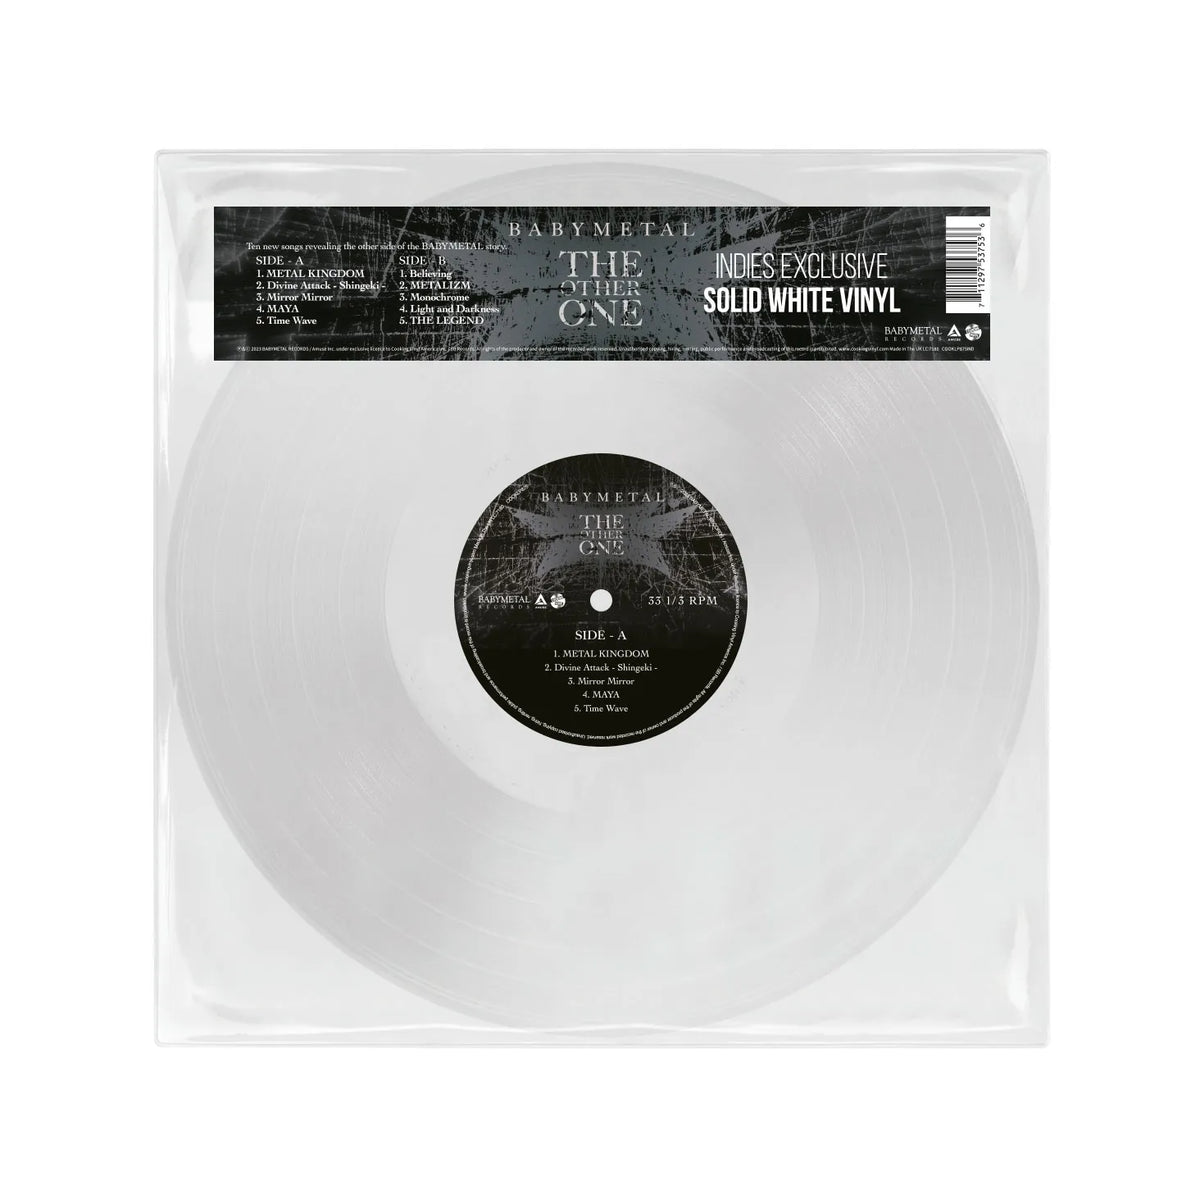 Babymetal - The Other One LP (Indie Exclusive White Vinyl)